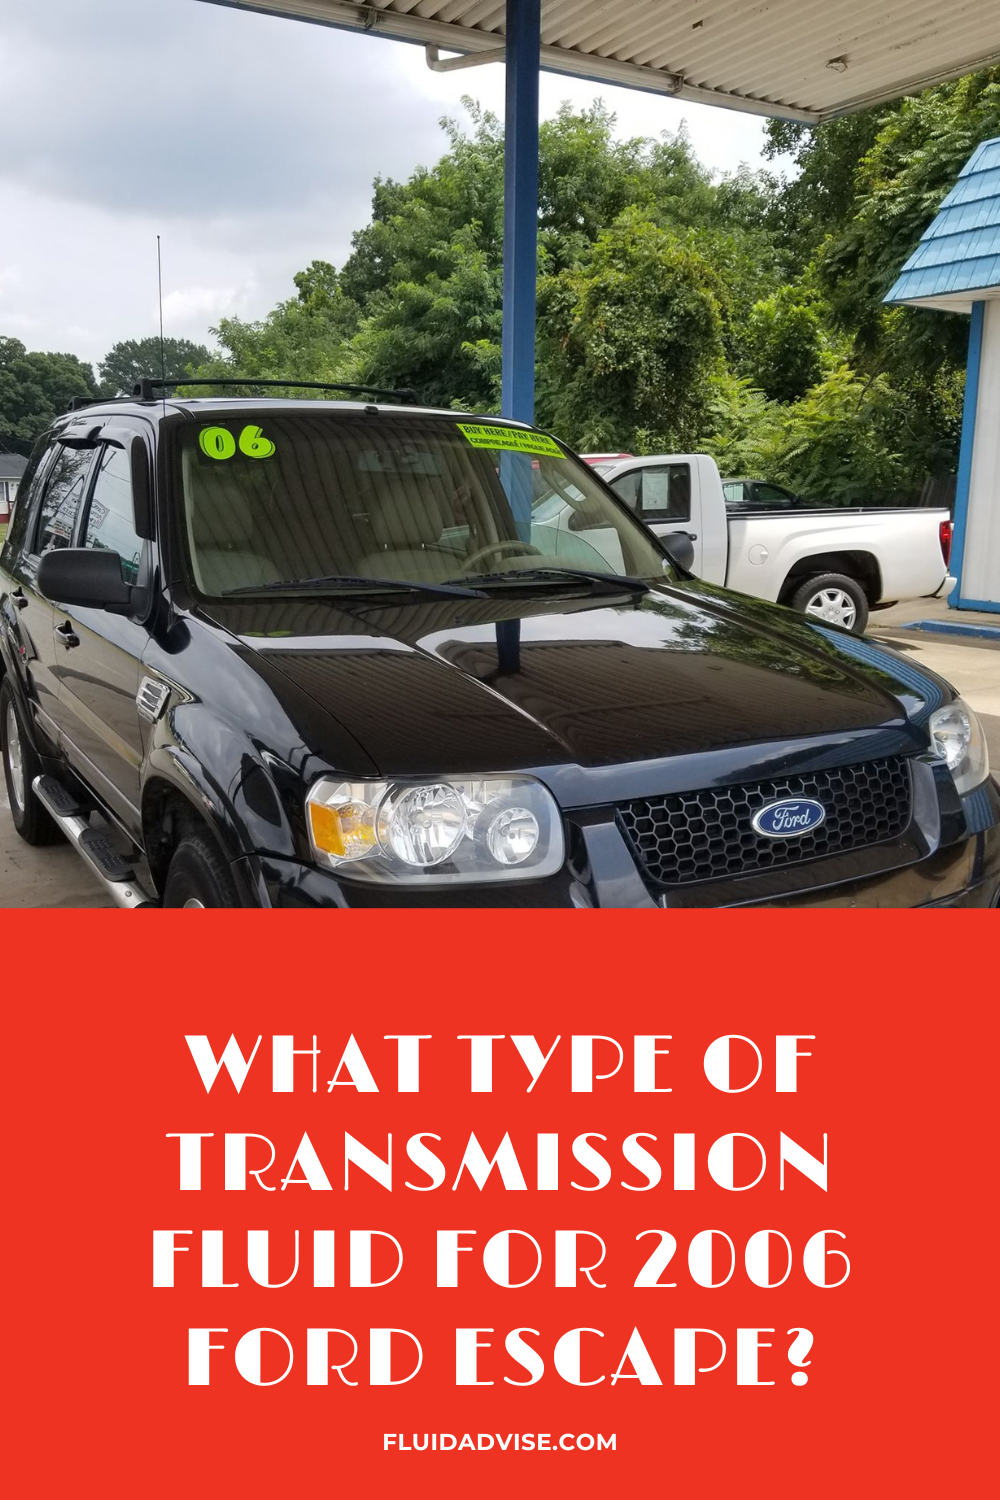 How Much Transmission Fluid Does 2006 Ford Escape Take?